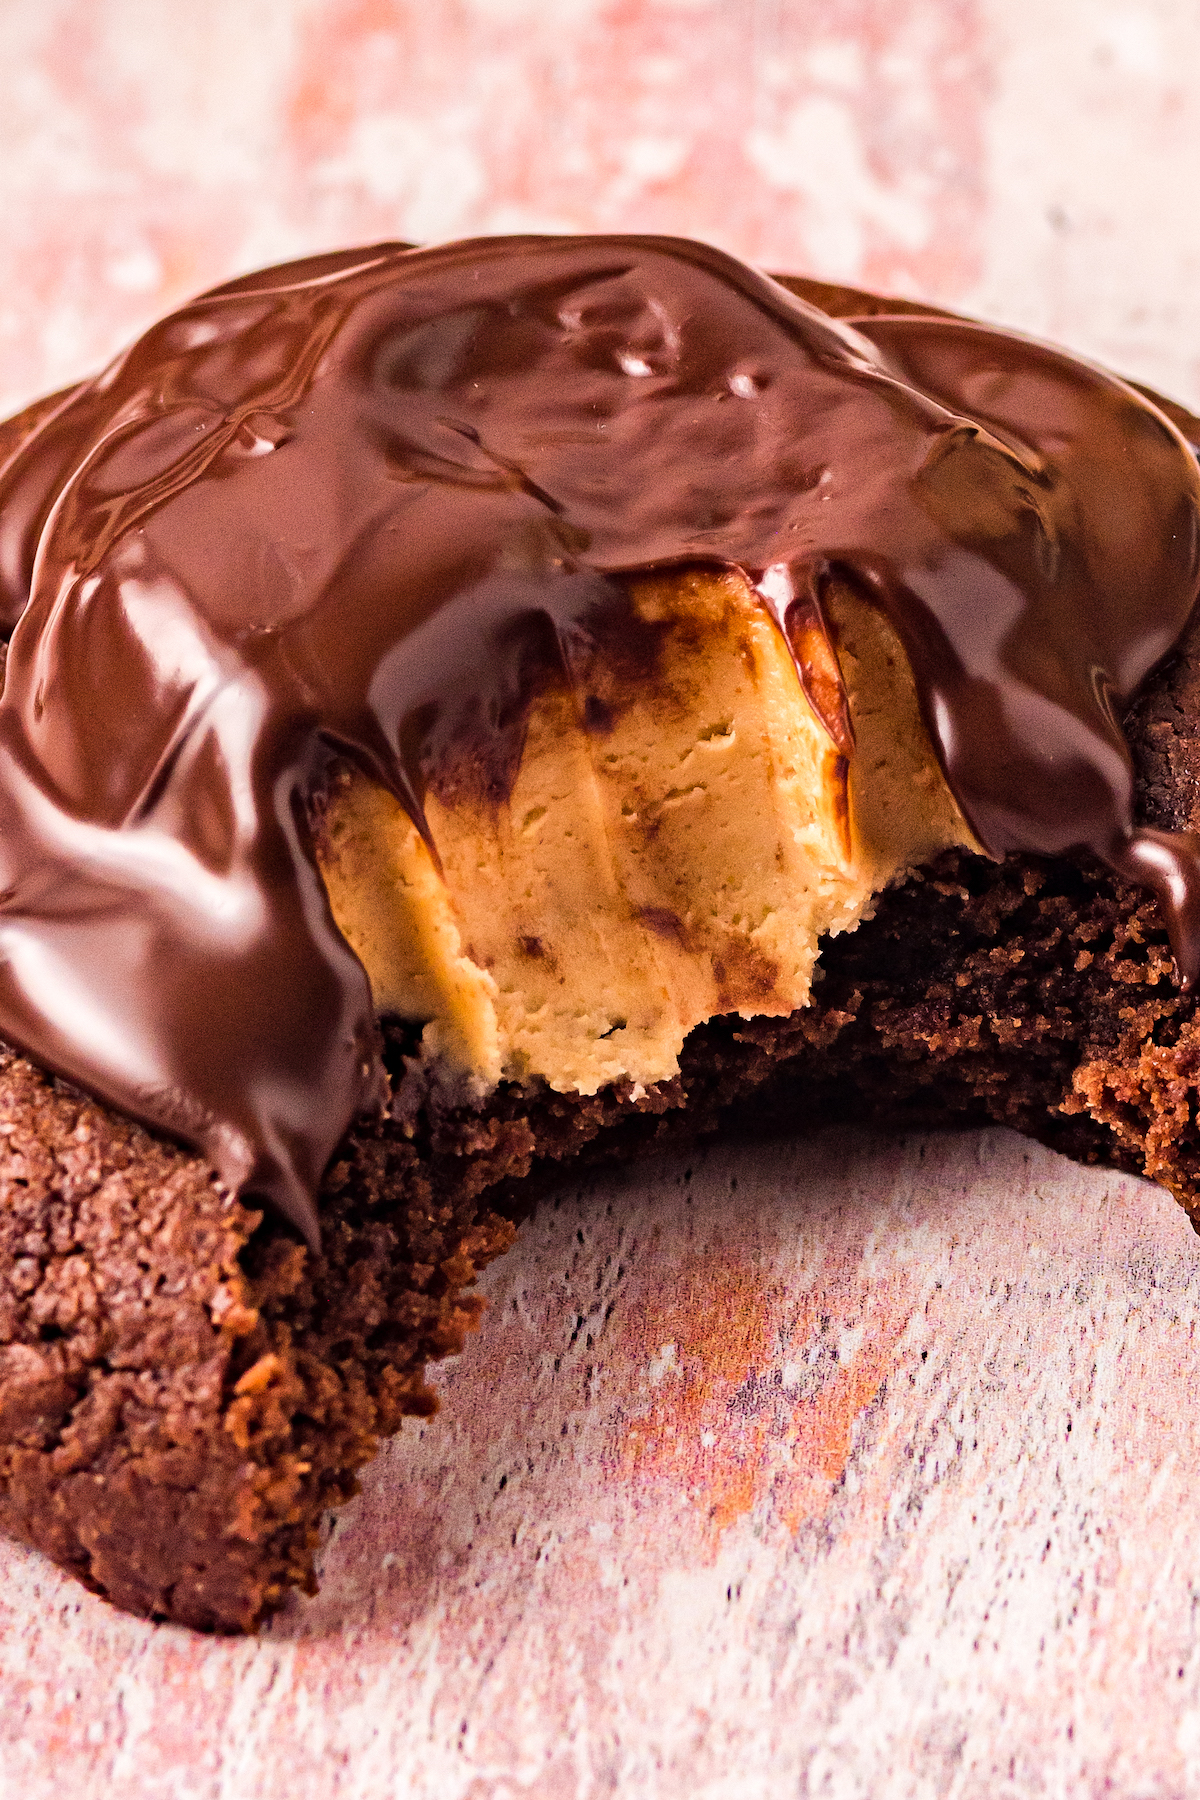 Glossy melted chocolate tops a peanut butter buckeye nestled in a chocolate cookie.